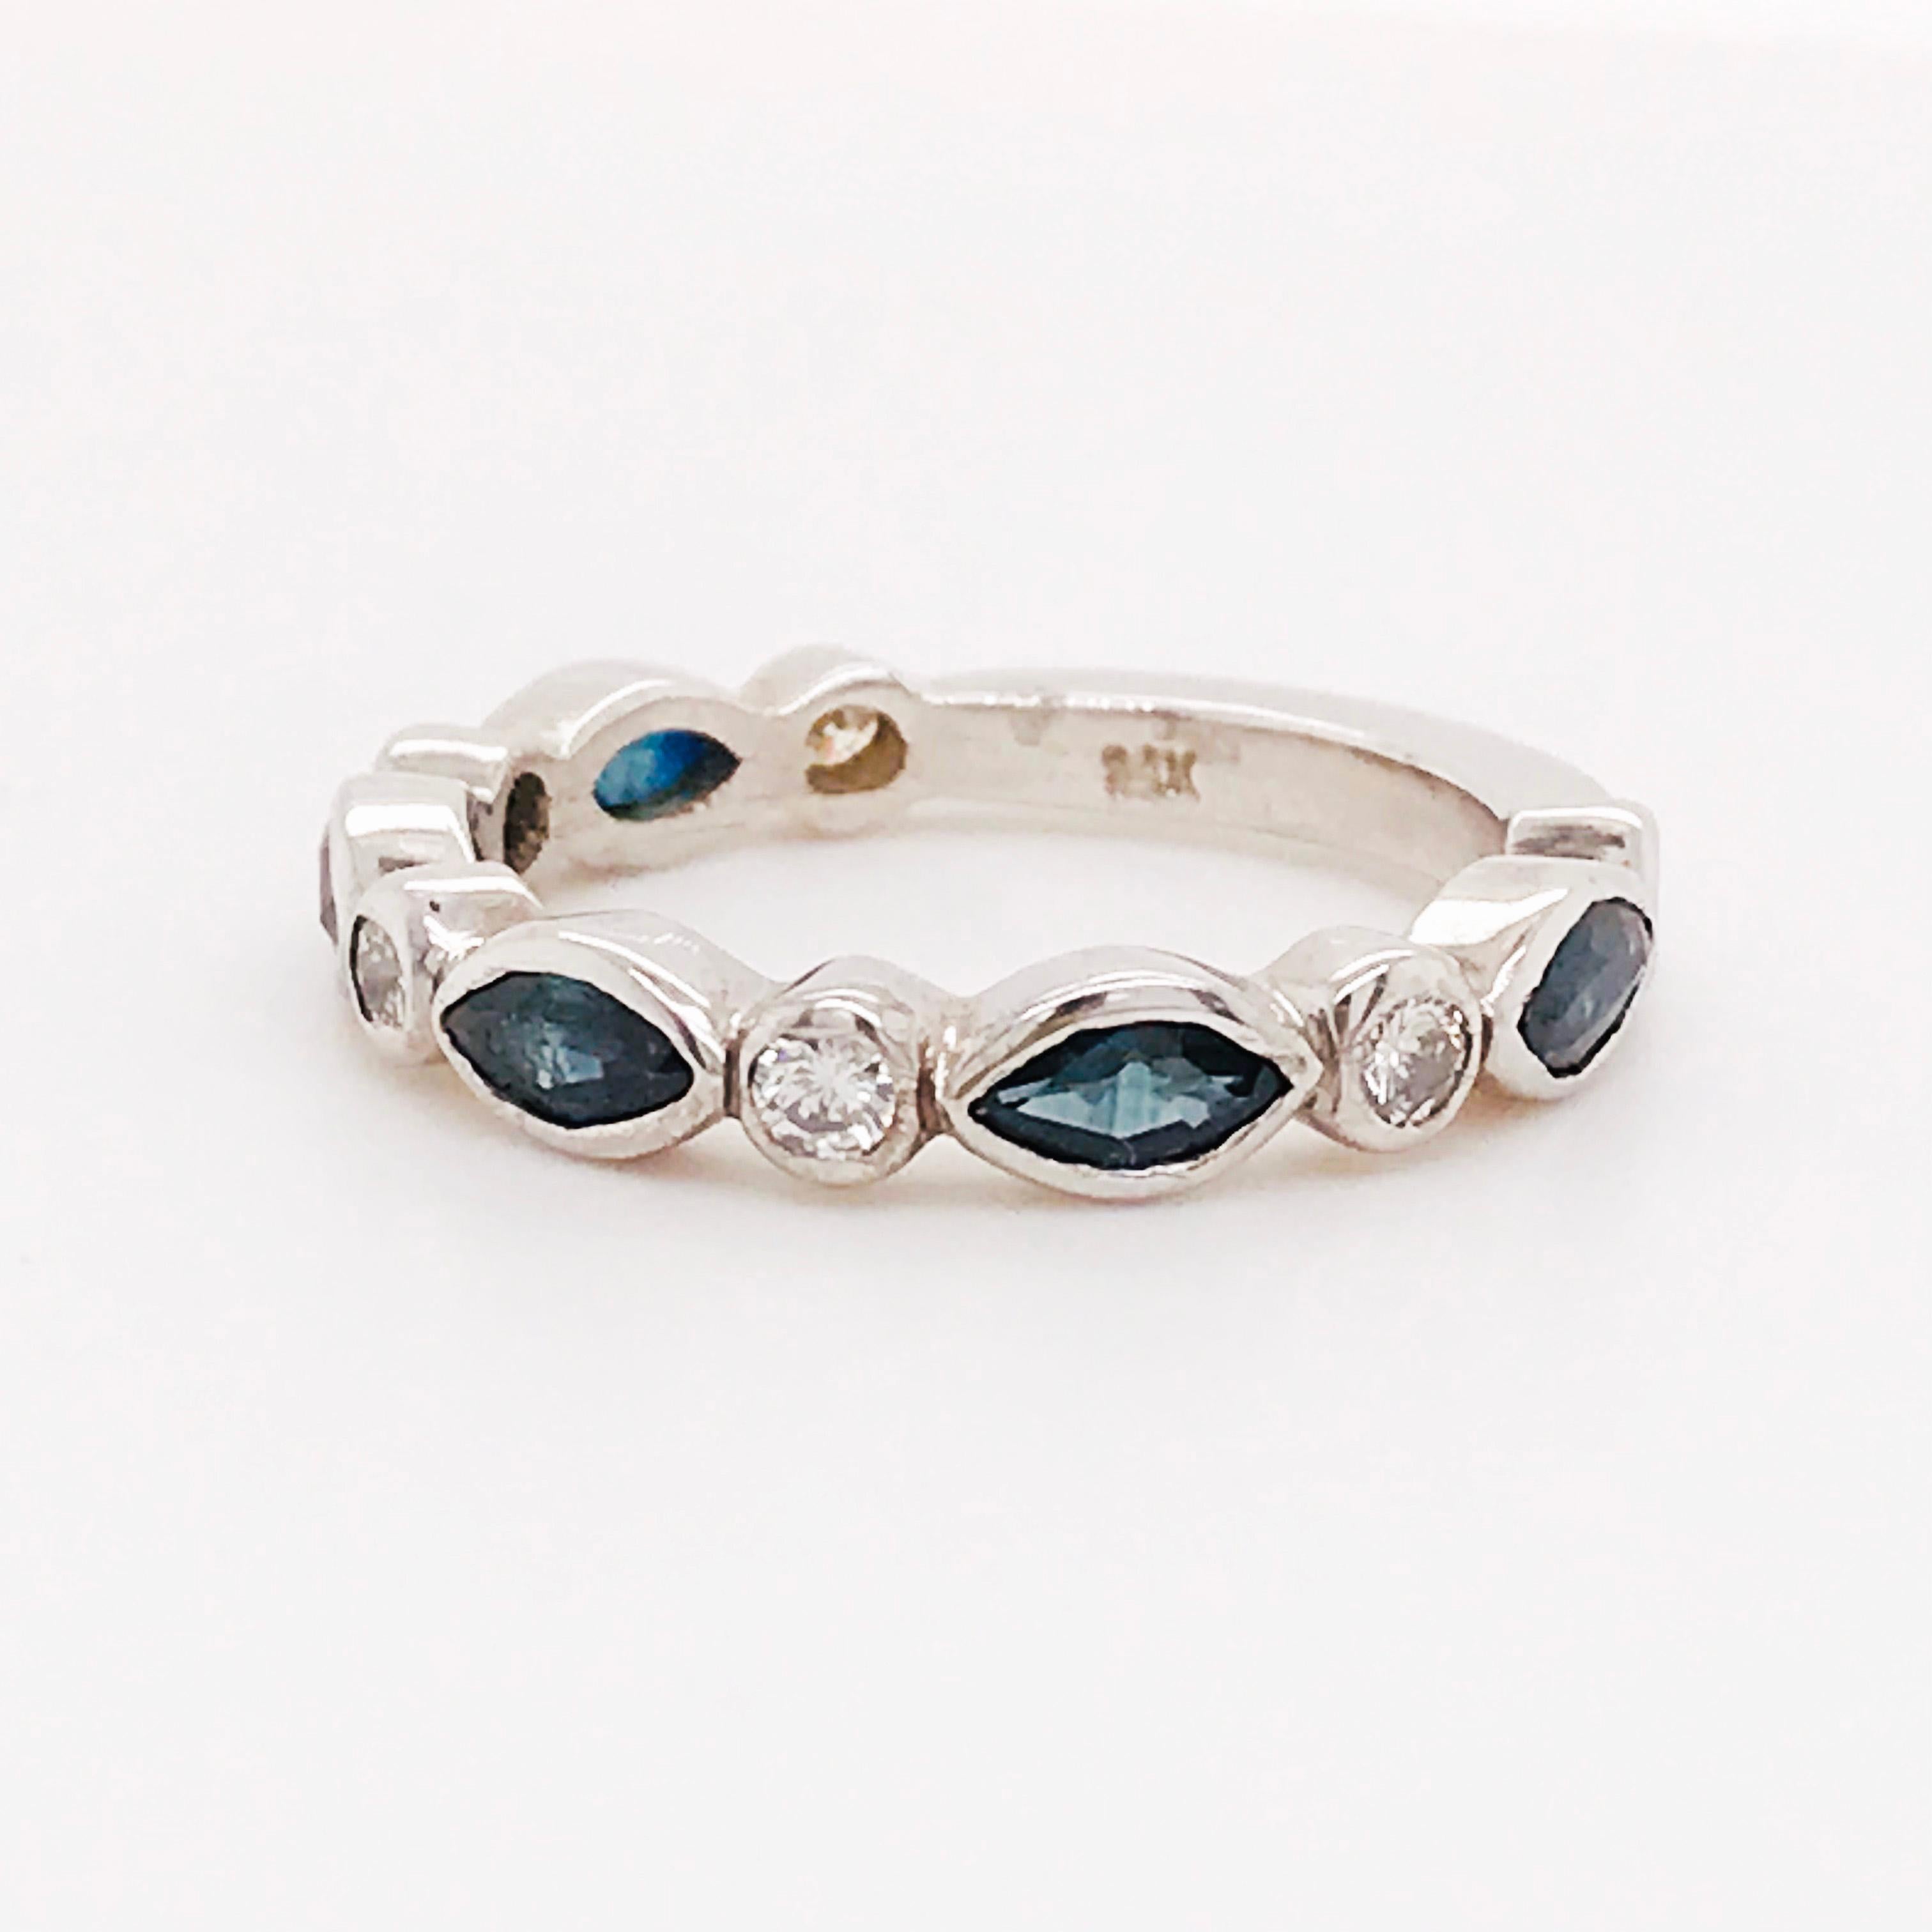 This is a gorgeous ring with five genuine marquise shaped blue sapphire gemstones set East to West. In between round brilliant white diamonds. This band has a unique scalloped design with a fun blue and white pattern. The sapphire gemstones are a